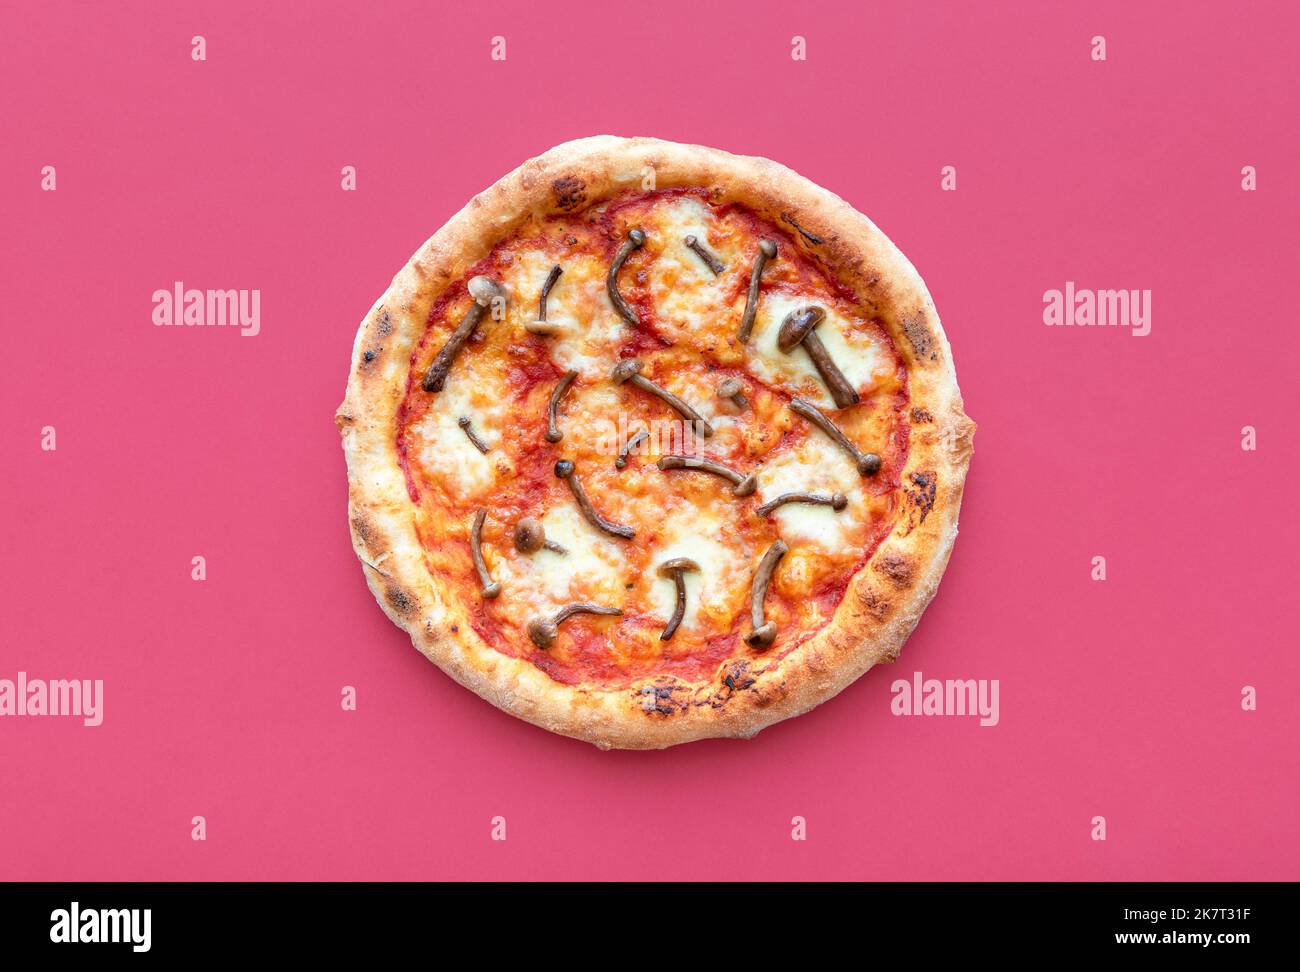 Above view with a freshly baked pizza minimalist on a dark pink table. Vegetarian pizza with wild edible mushrooms, tomato sauce, and mozzarella Stock Photo